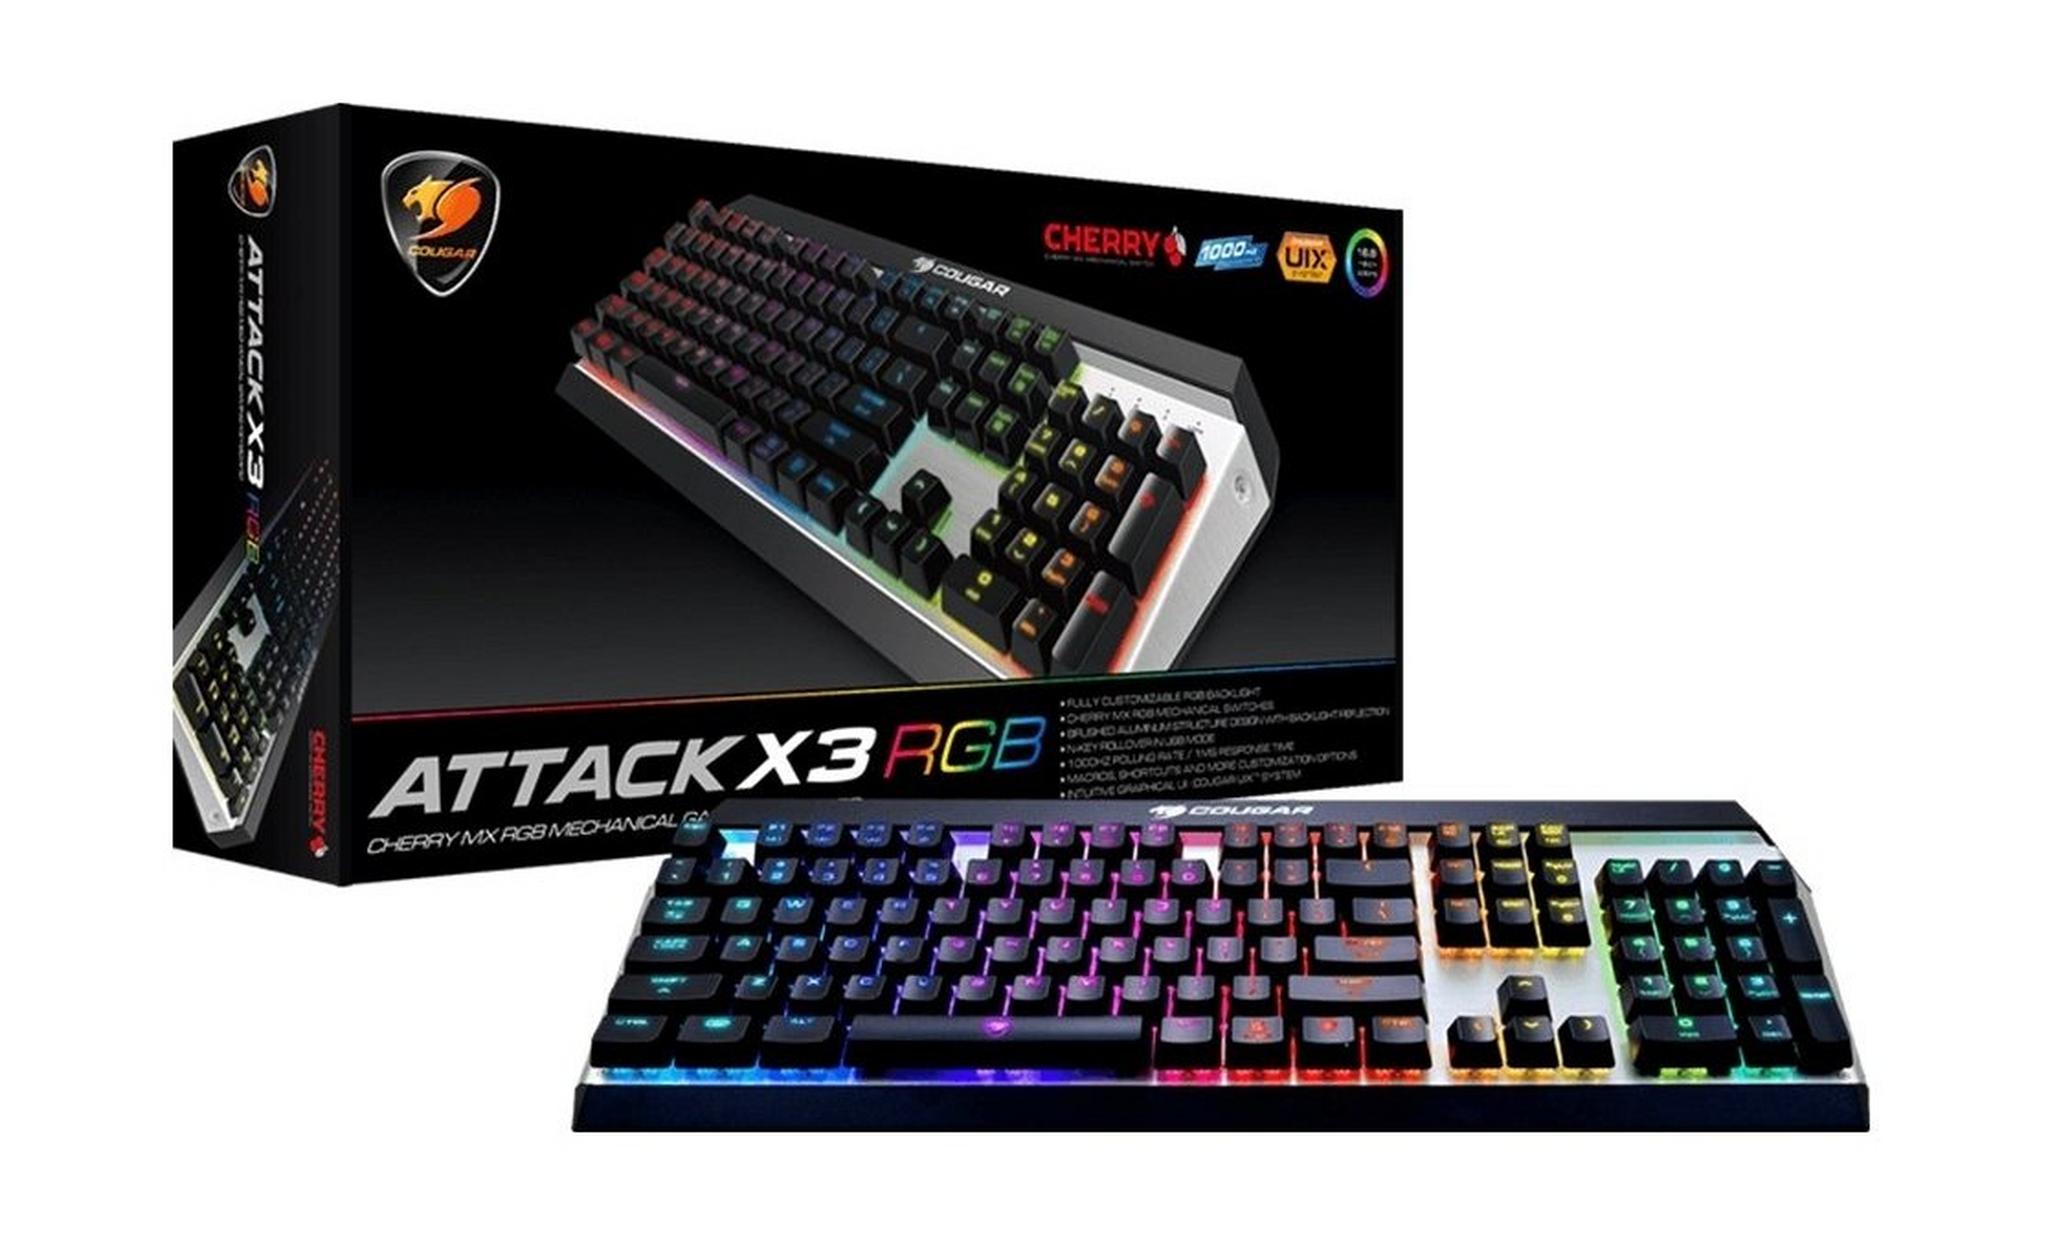 Cougar Attack X3 RGB Mechanical Gaming Keyboard - Cherry MX Red Switches